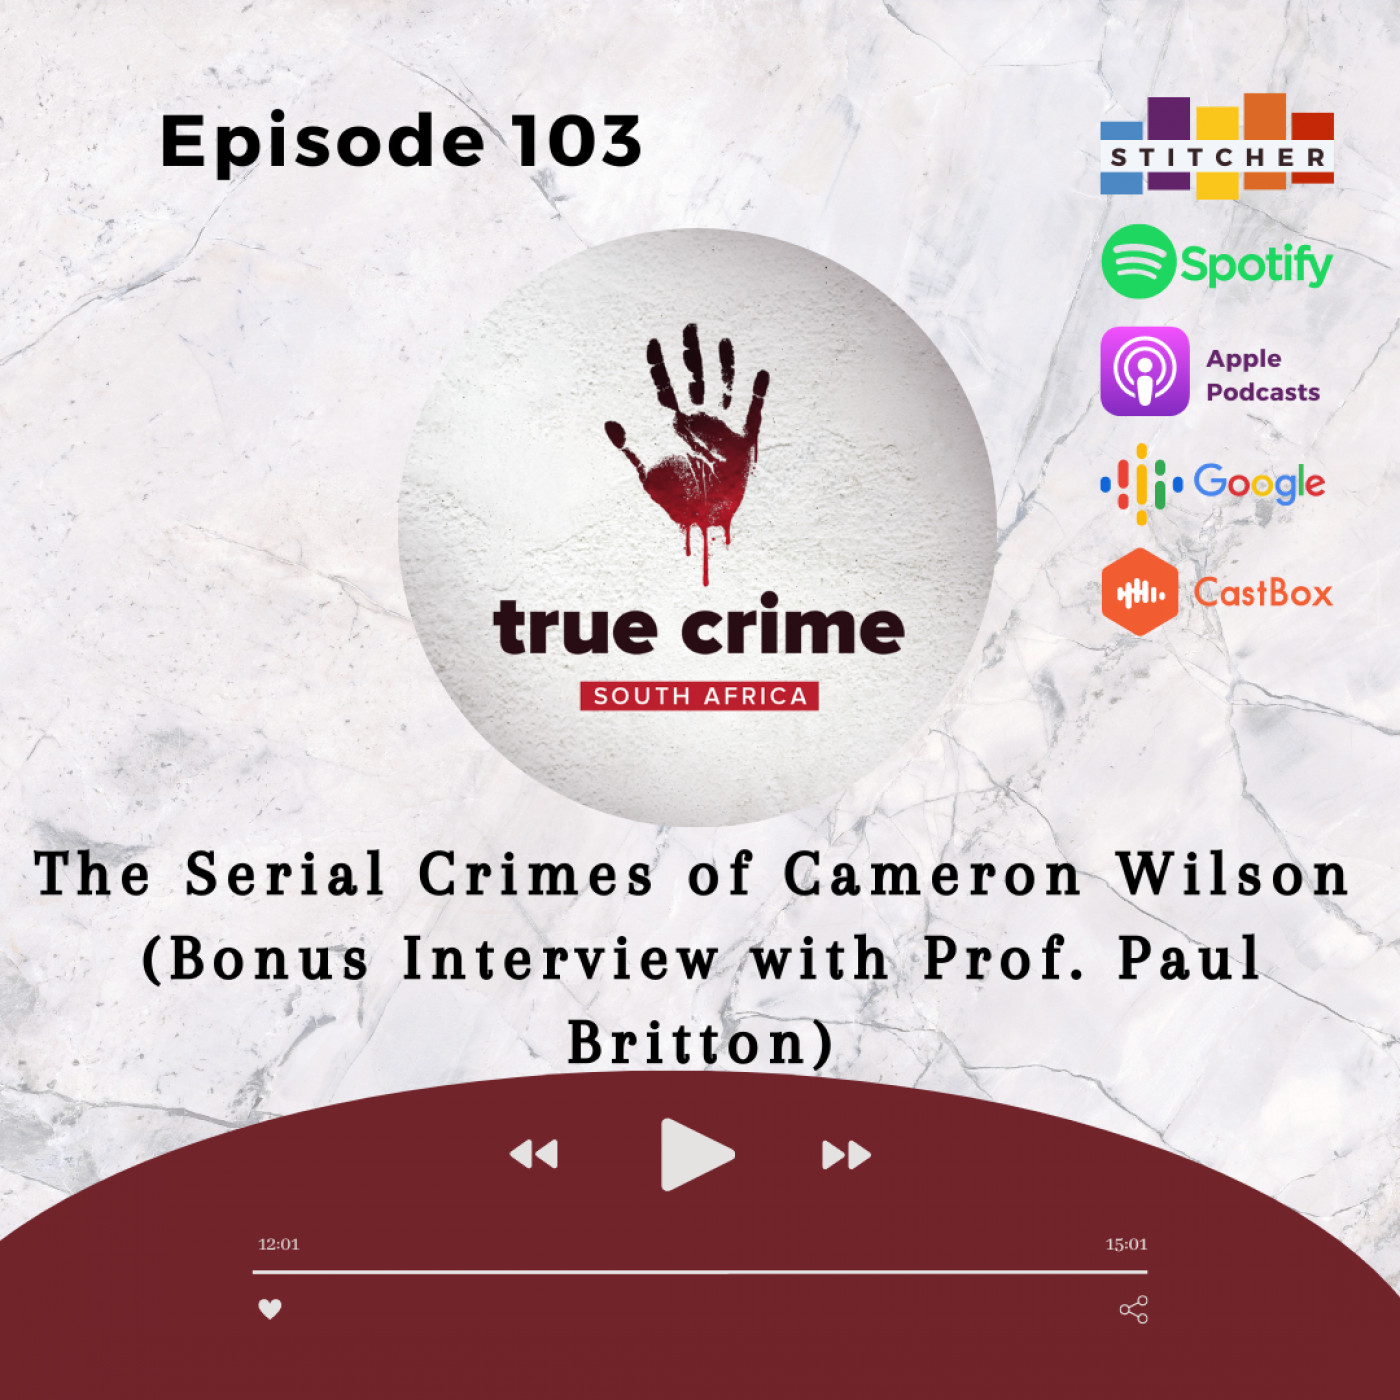 Ep 103 The Serial Crimes of Cameron Wilson (Bonus Interview with Prof. Britton)